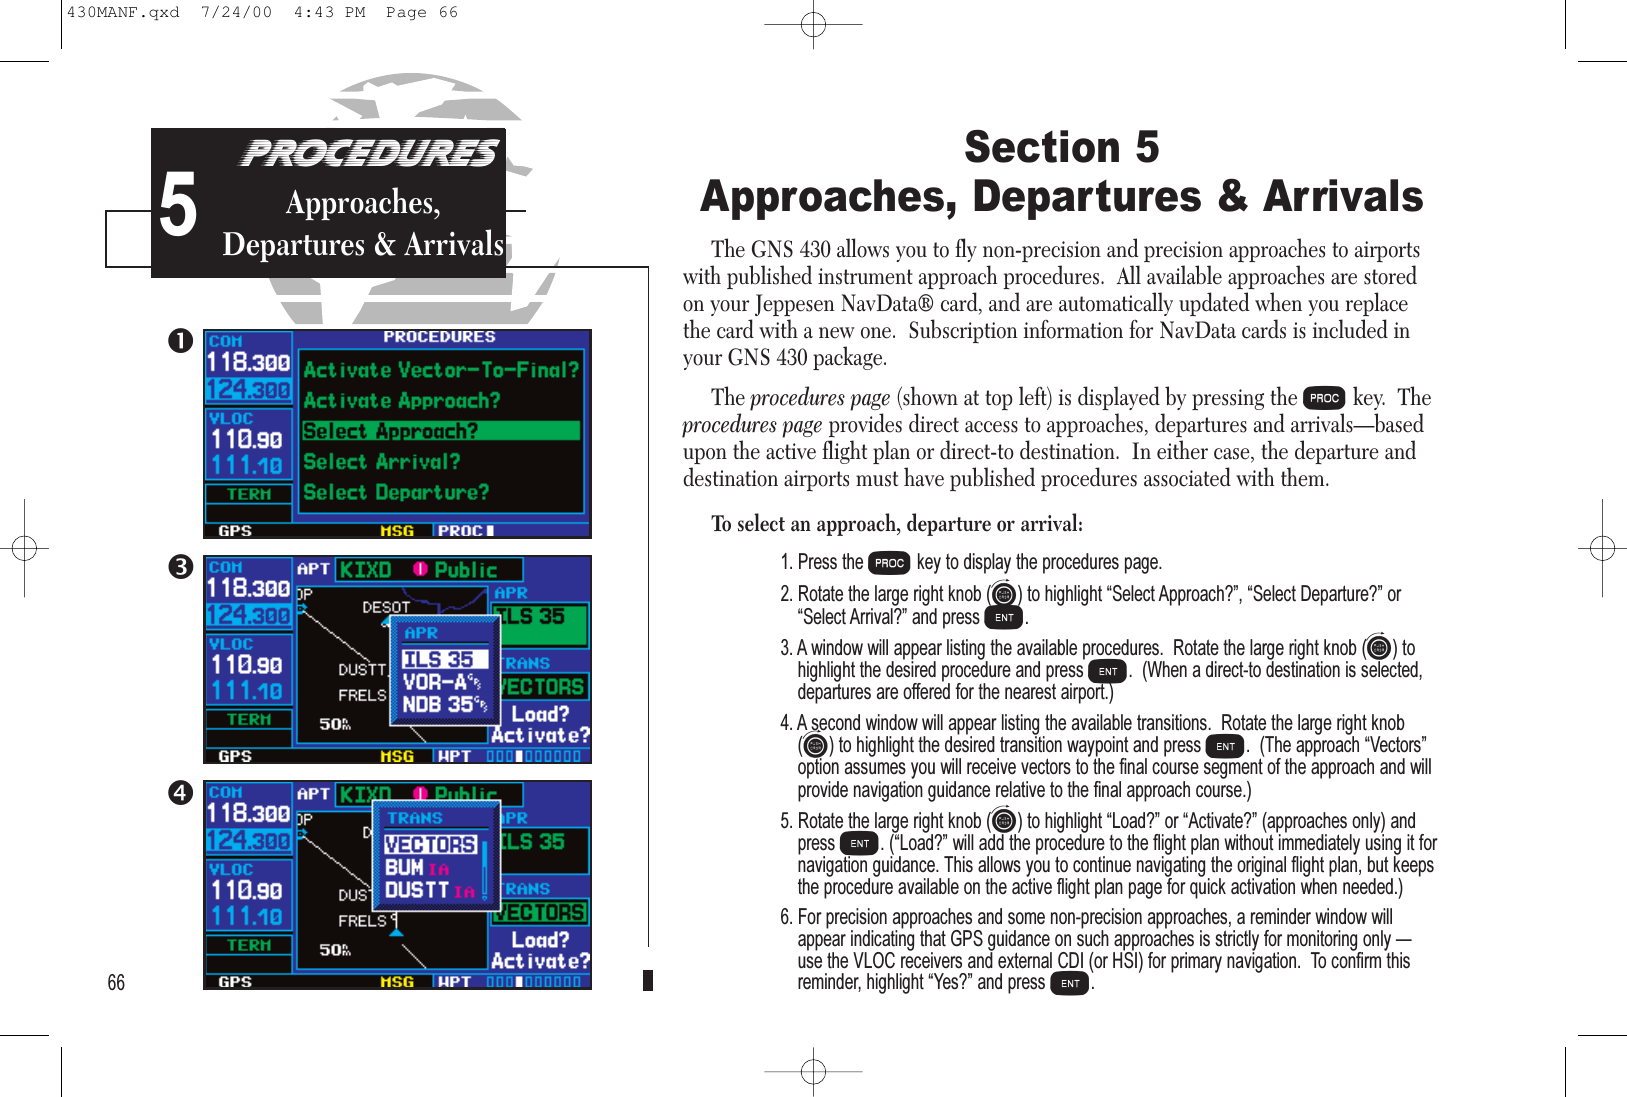 PROCEDURESApproach Examples5Section 5Approaches, Departures &amp; ArrivalsThe GNS 430 allows you to fly non-precision and precision approaches to airportswith published instrument approach procedures.  All available approaches are storedon your Jeppesen NavData® card, and are automatically updated when you replacethe card with a new one.  Subscription information for NavData cards is included inyour GNS 430 package.The procedures page (shown at top left) is displayed by pressing the Pkey.  Theprocedures page provides direct access to approaches, departures and arrivals—basedupon the active flight plan or direct-to destination.  In either case, the departure anddestination airports must have published procedures associated with them.To select an approach, departure or arrival:1. Press the Pkey to display the procedures page.2. Rotate the large right knob (d) to highlight Select Approach?, Select Departure? orSelect Arrival? and press E.3. A window will appear listing the available procedures.  Rotate the large right knob (d) tohighlight the desired procedure and press E.  (When a direct-to destination is selected,departures are offered for the nearest airport.)4. A second window will appear listing the available transitions.  Rotate the large right knob(d) to highlight the desired transition waypoint and press E.  (The approach Vectorsoption assumes you will receive vectors to the final course segment of the approach and willprovide navigation guidance relative to the final approach course.)5. Rotate the large right knob (d) to highlight Load? or Activate? (approaches only) andpress E. (Load? will add the procedure to the flight plan without immediately using it fornavigation guidance. This allows you to continue navigating the original flight plan, but keepsthe procedure available on the active flight plan page for quick activation when needed.)6. For precision approaches and some non-precision approaches, a reminder window willappear indicating that GPS guidance on such approaches is strictly for monitoring only use the VLOC receivers and external CDI (or HSI) for primary navigation.  To confirm thisreminder, highlight Yes? and press E.66PROCEDURESApproaches,Departures &amp; Arrivals5430MANF.qxd  7/24/00  4:43 PM  Page 66